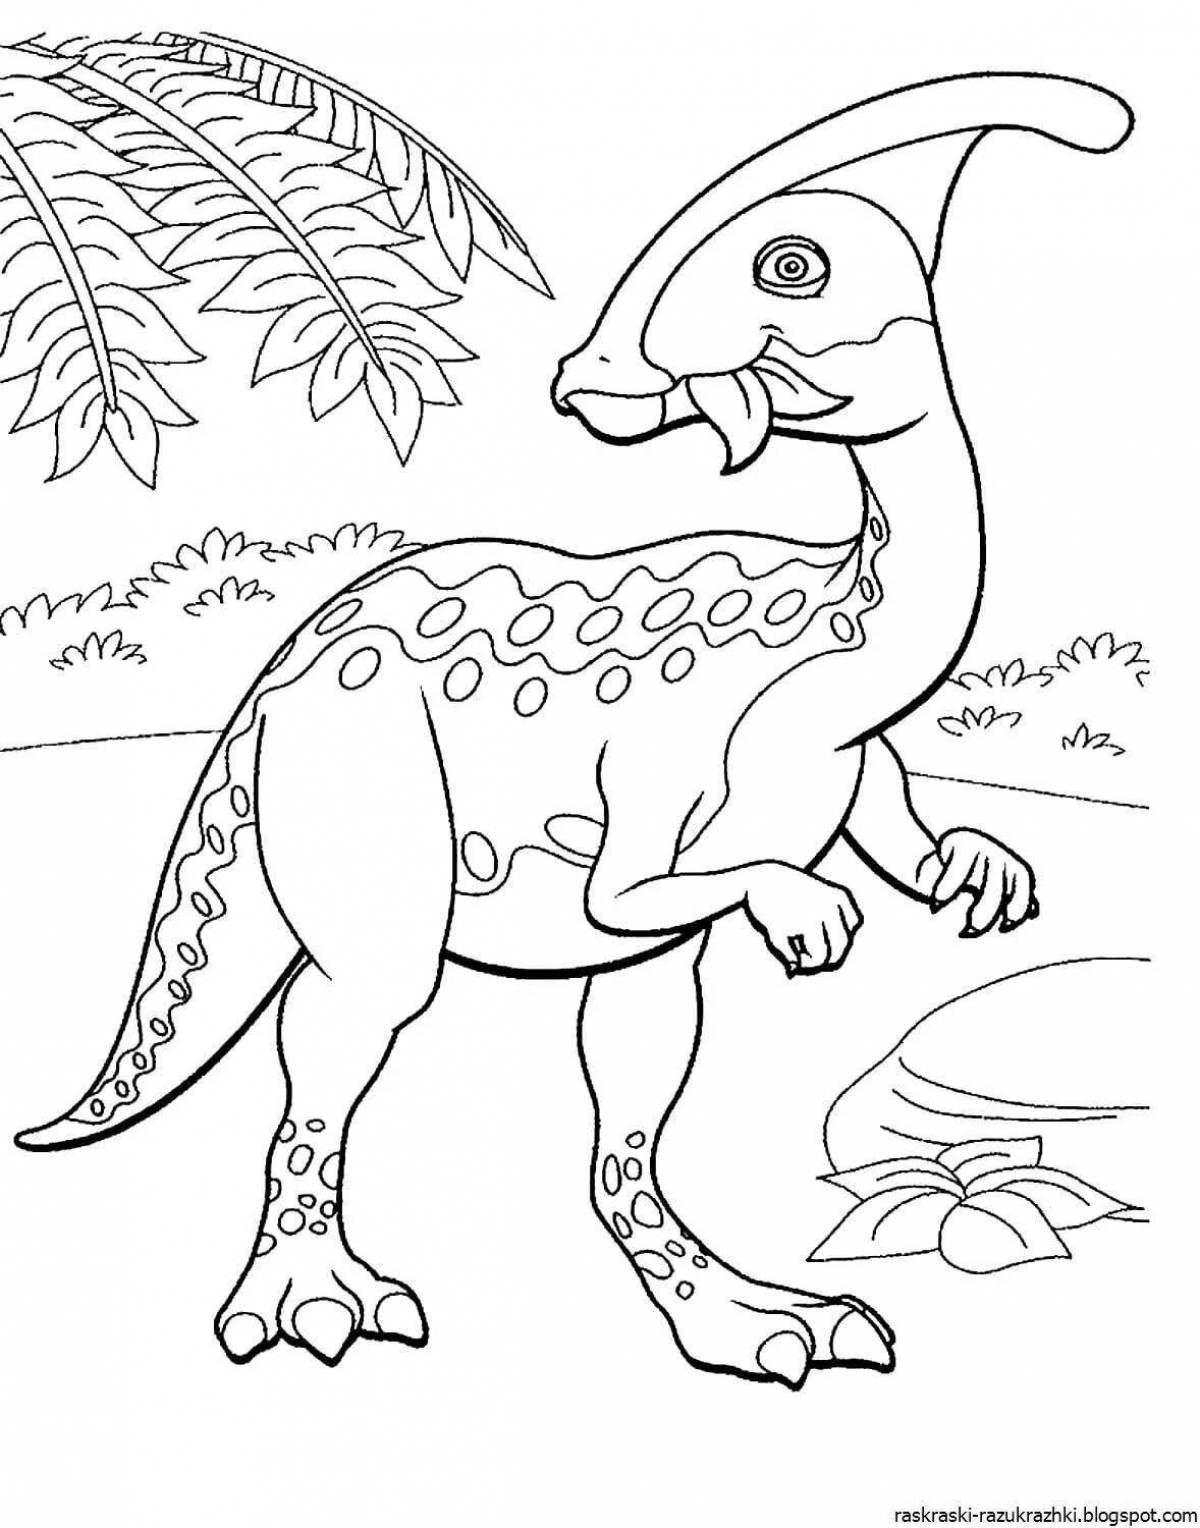 Colorful dinosaur coloring for boys 5-6 years old